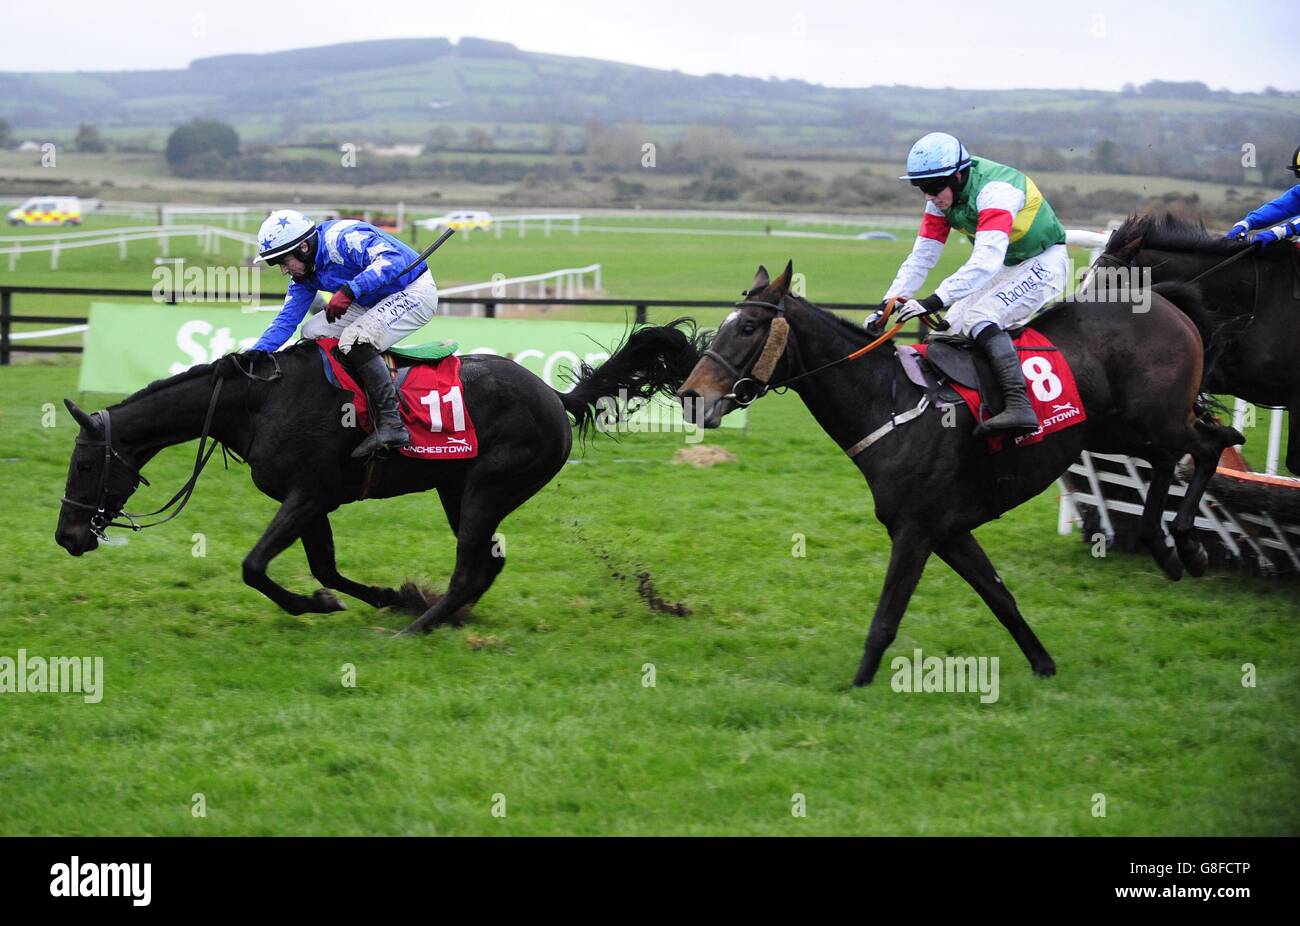 Steel Wave ridden by Mark Enright (left) survives a stumble at the final hurdle to win the Flynn & Lynch Life And Pensions Supporting Longford GAA Handicap Hurdle during day two of the Winter Festival at Punchestown Racecourse, Co. Kildare, Ireland. Stock Photo